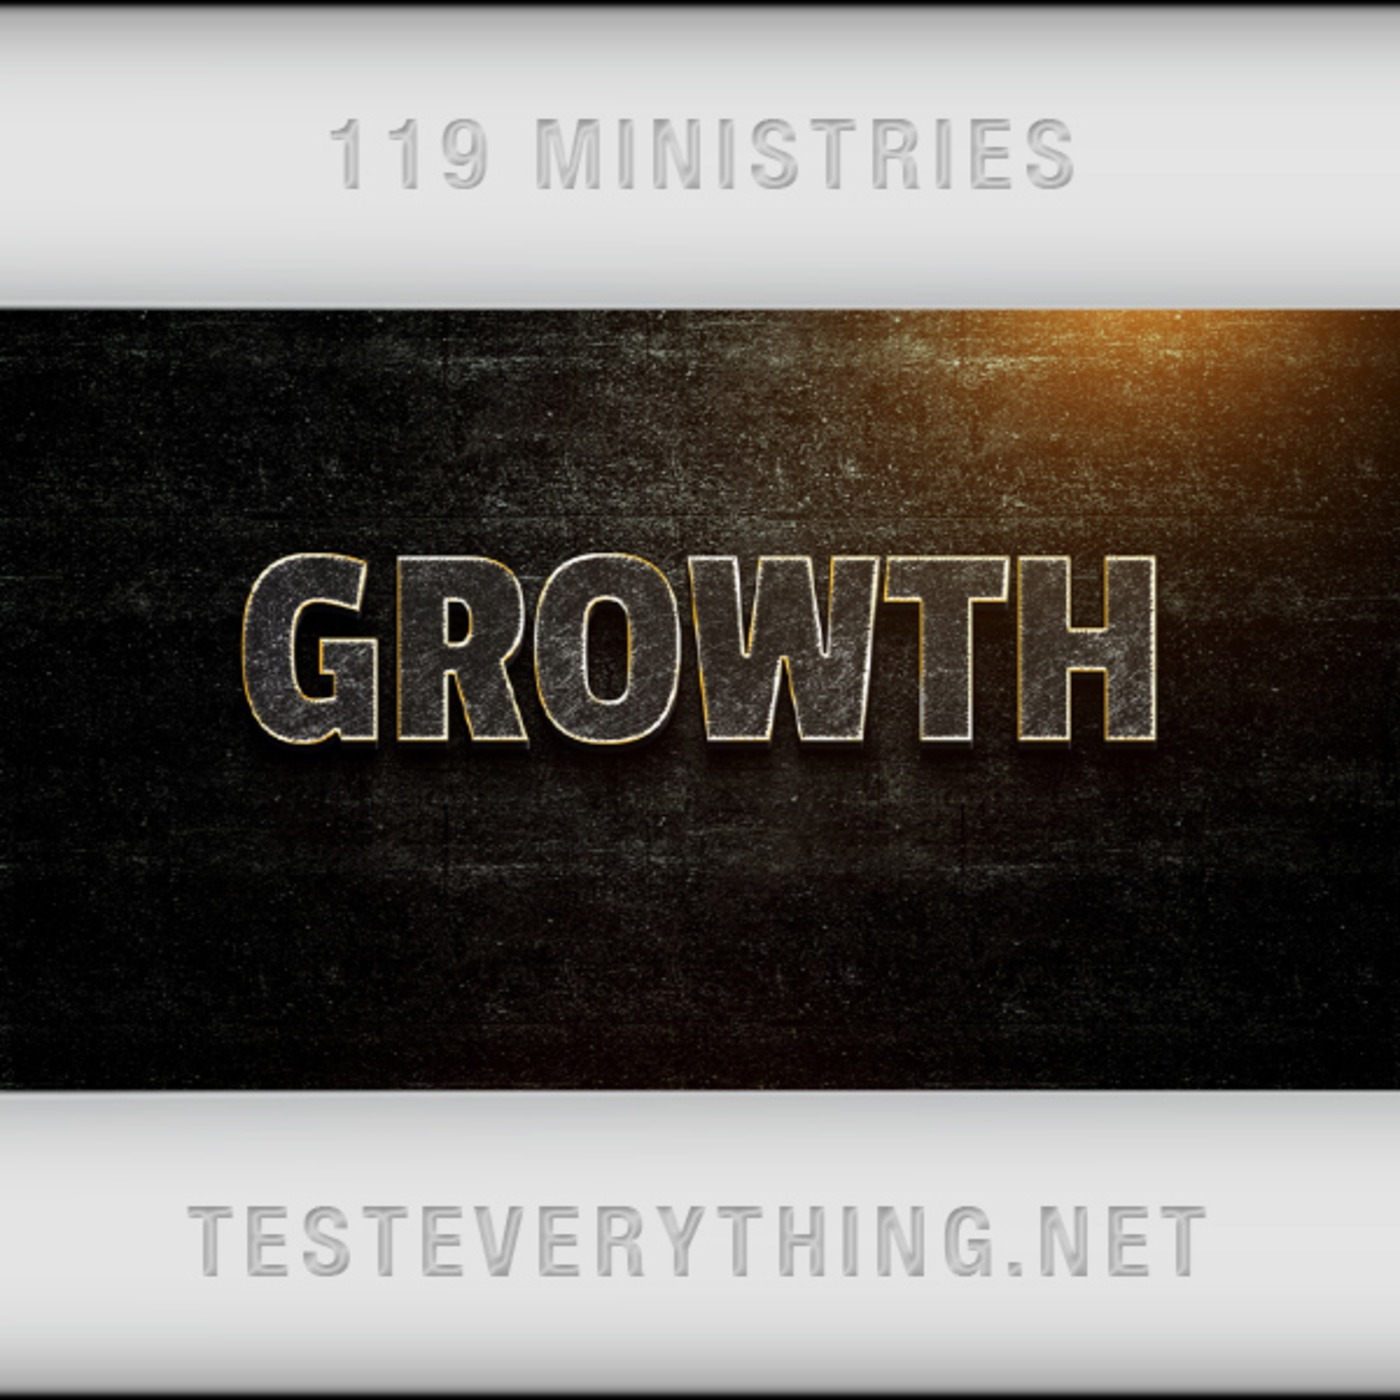 Messages: Growth